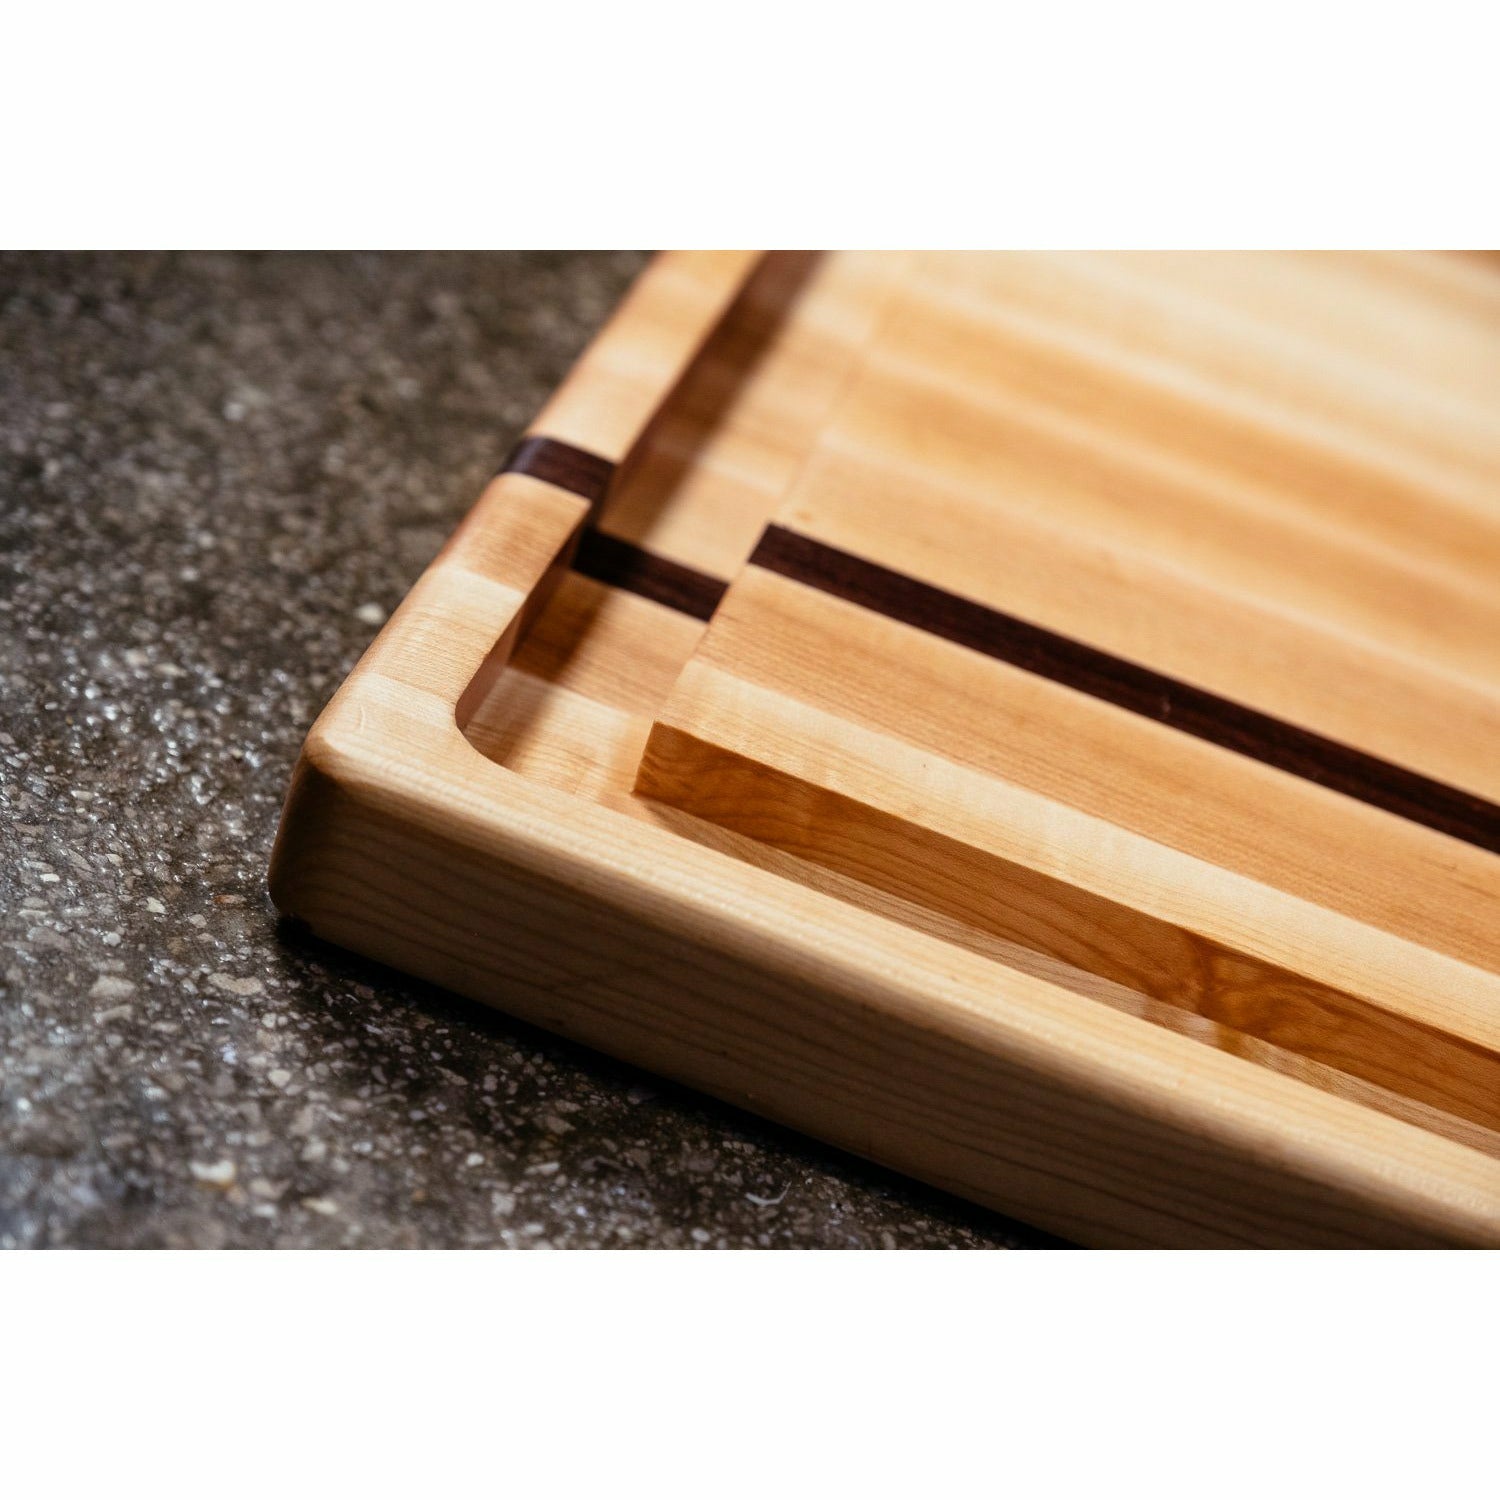 Wood Cutting Board Famous Design Hides Knife Marks